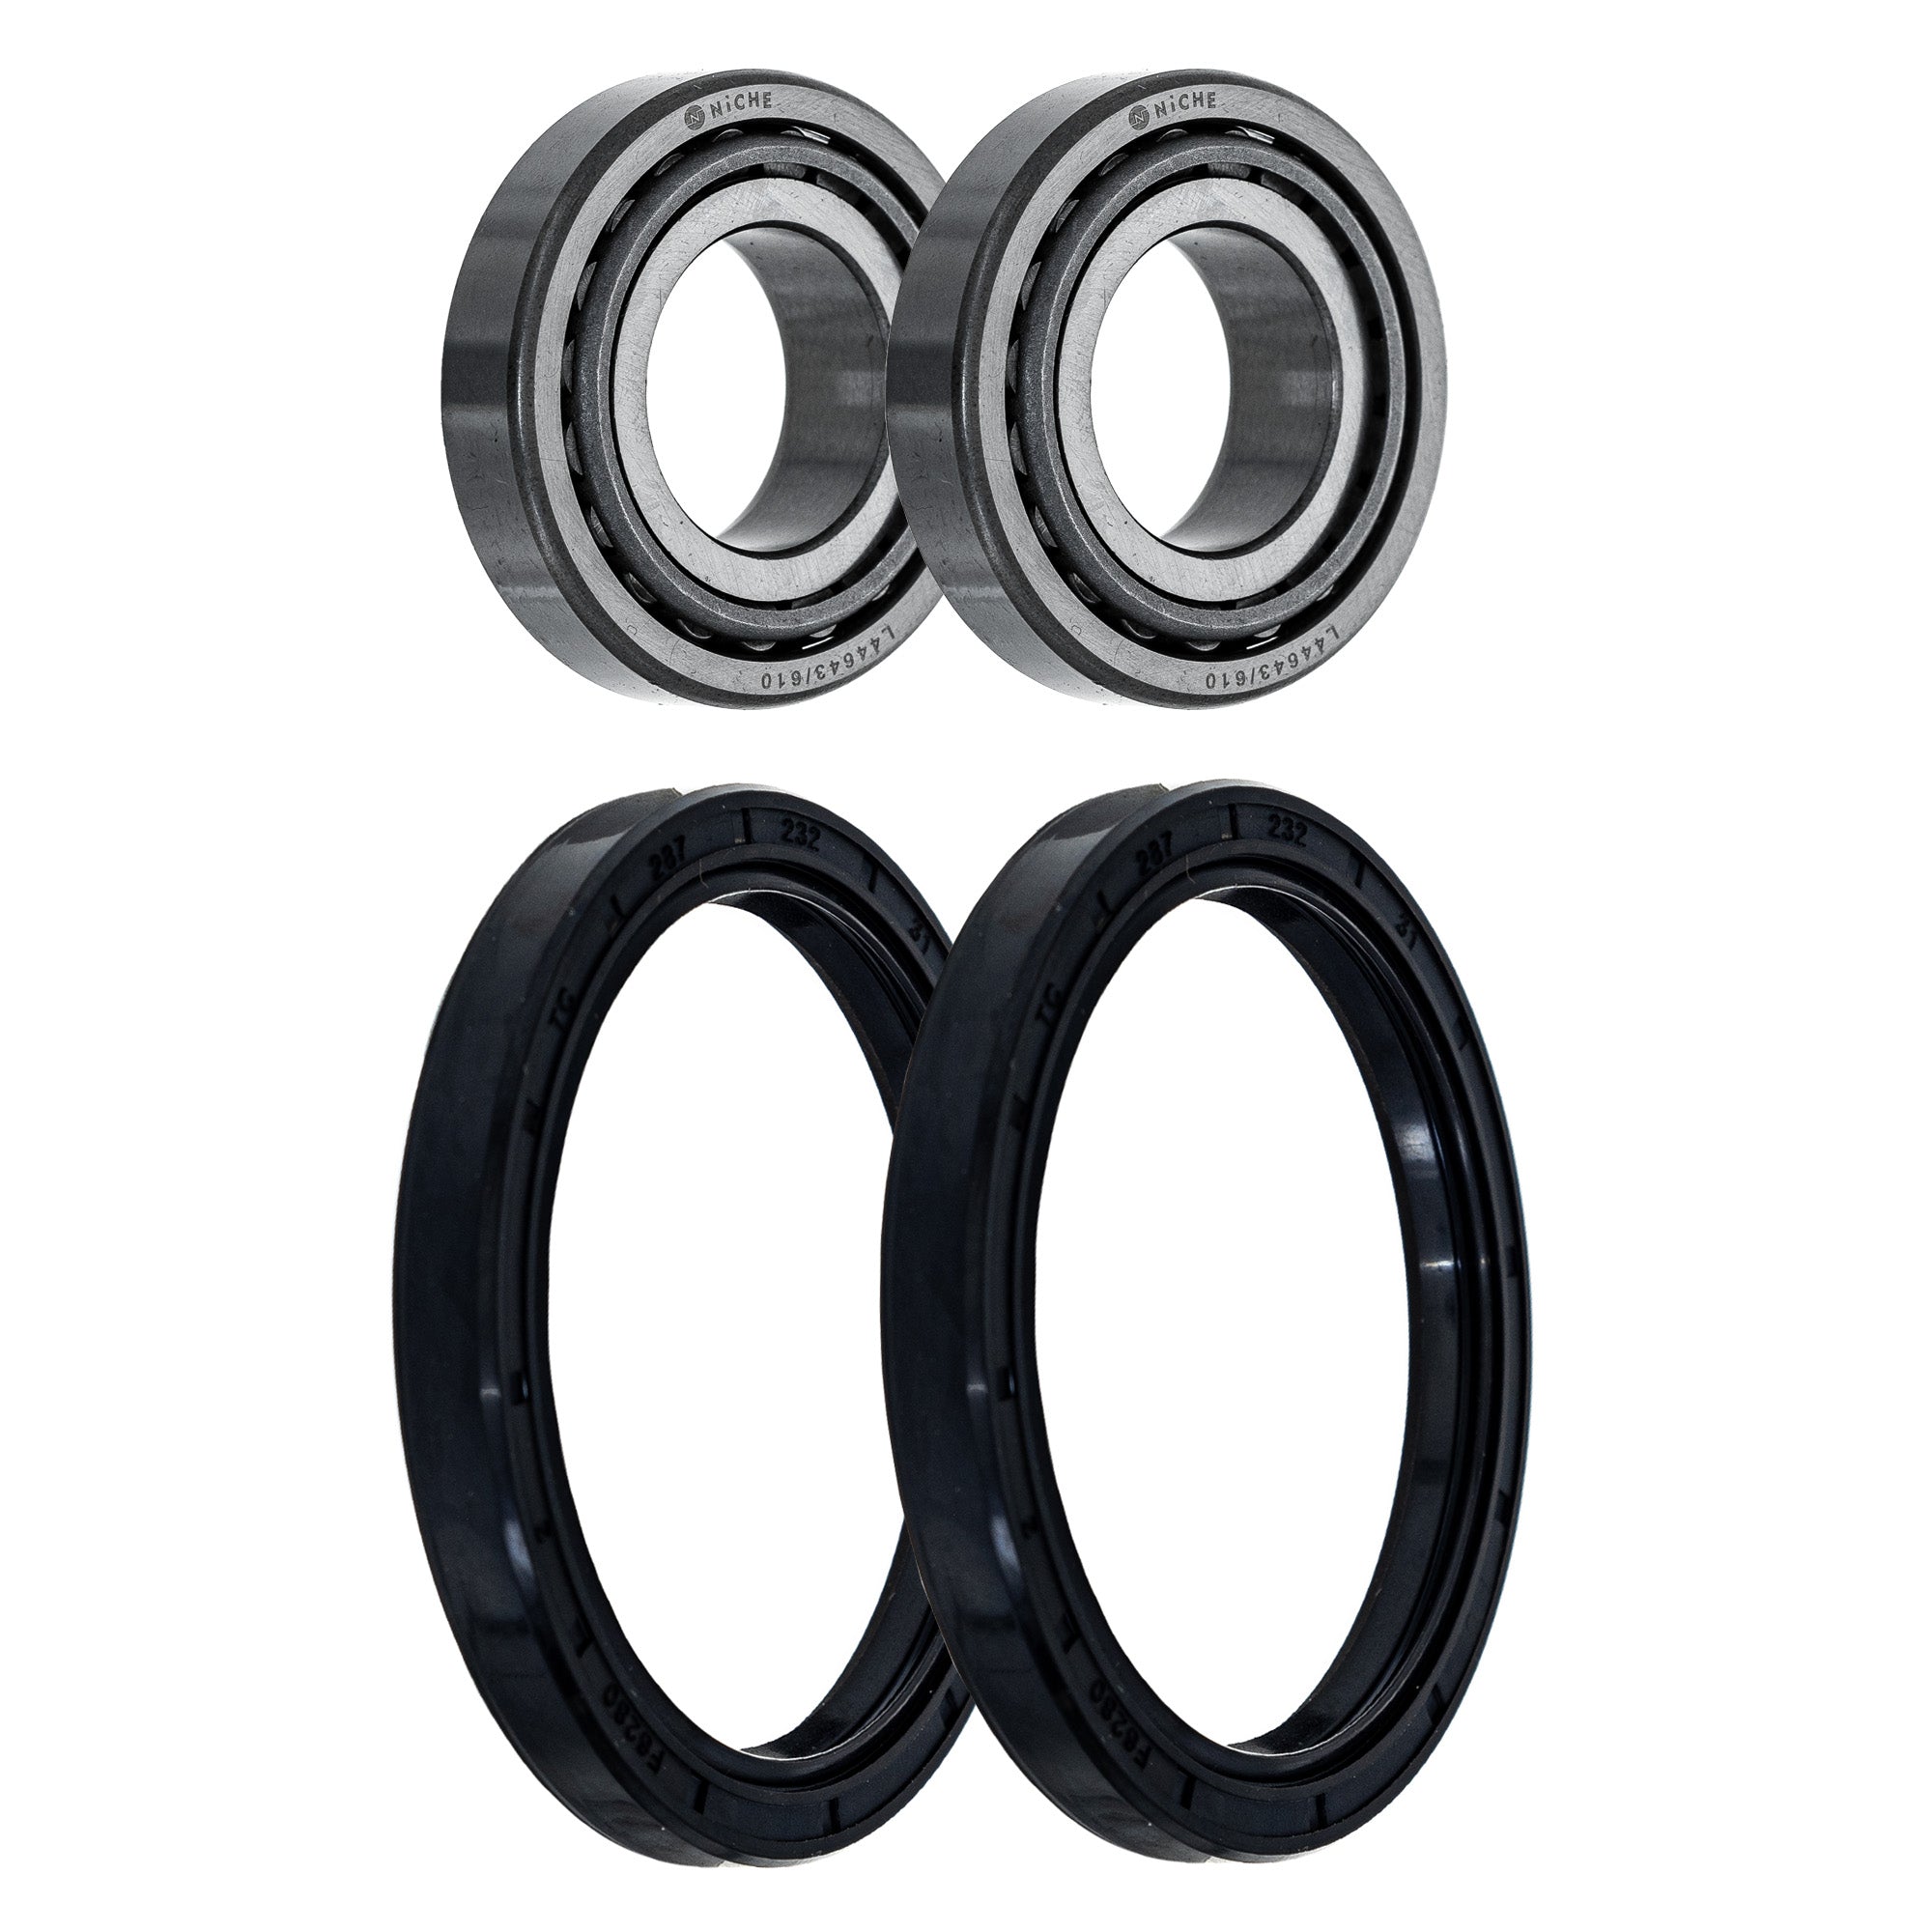 Wheel Bearing Seal Kit for zOTHER Xplorer Xpedition Worker Trail NICHE MK1009087